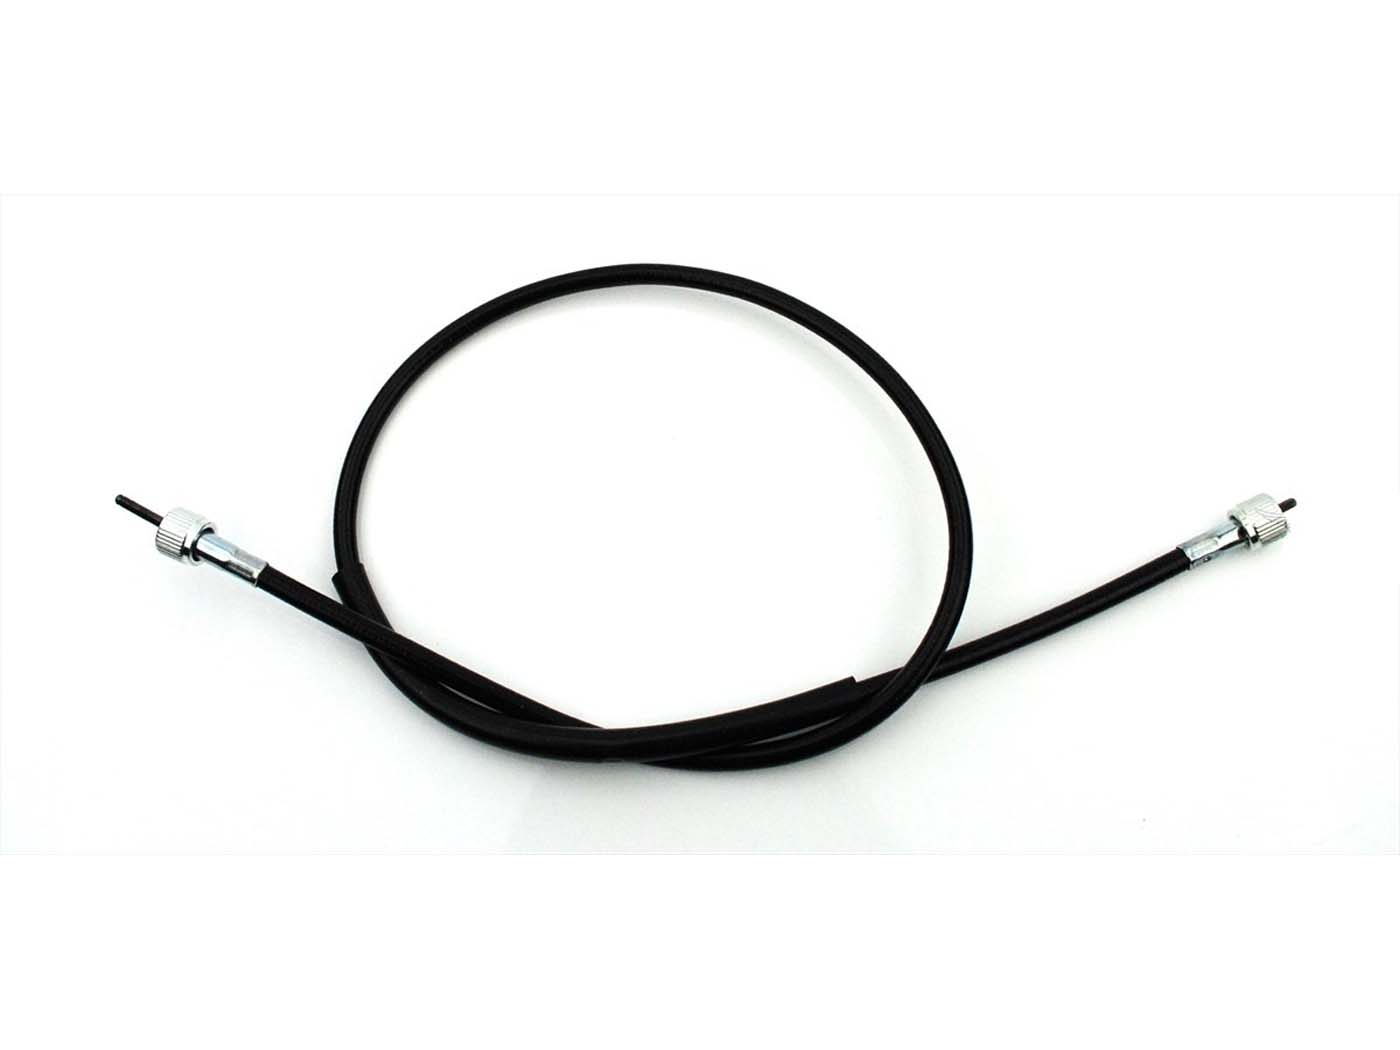 Speedometer Cable 860mm For Yamaha DT 50 R, FS 1 80, DX, RD 50, 125, 250, 350